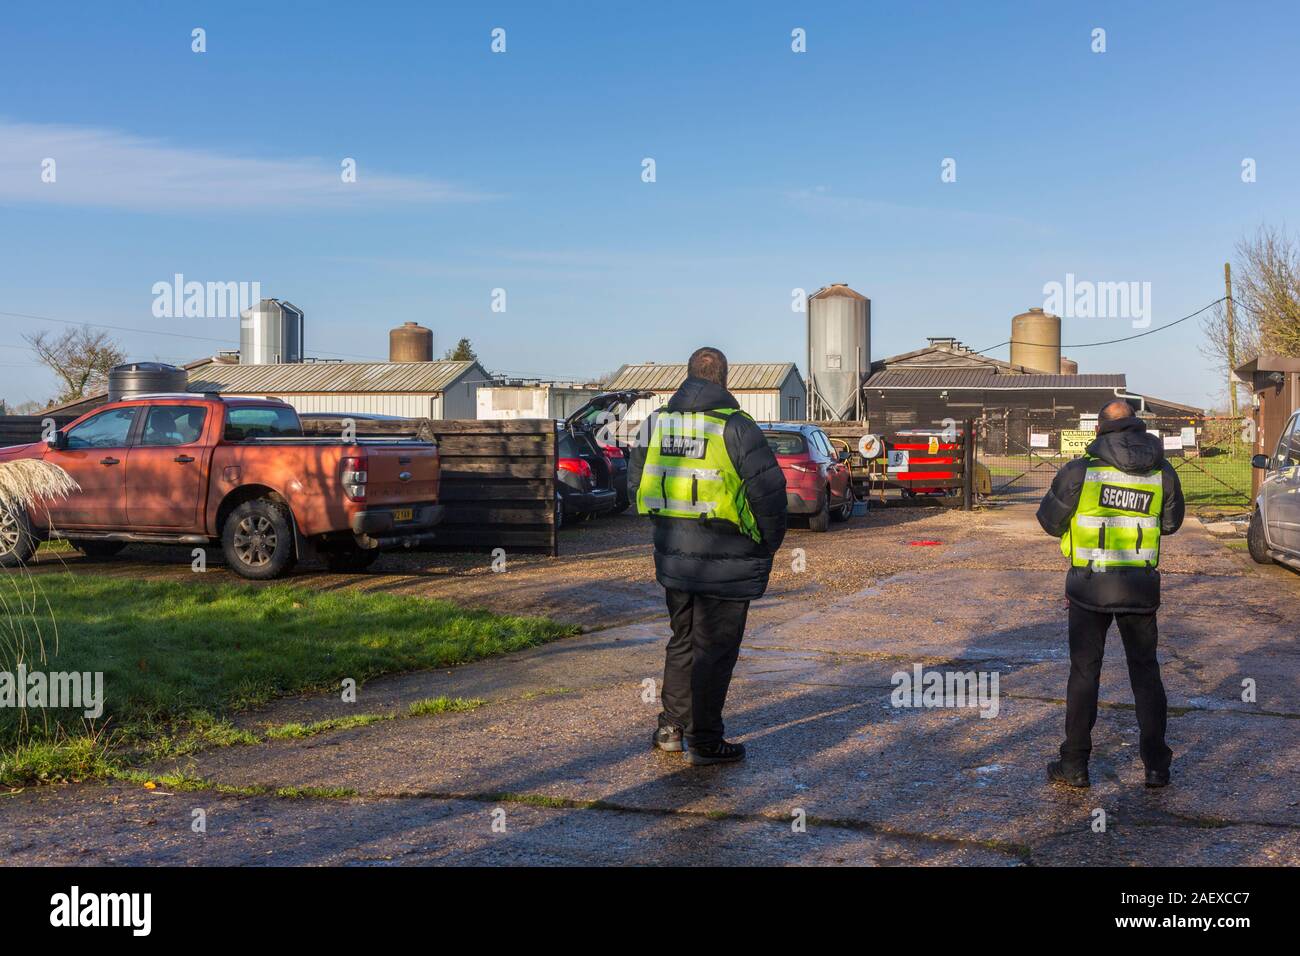 11th December 2019. An outbreak of Bird Flu,  Avian Influenza at Homefield Farm, Athelington, Suffolk, UK.  The scene at the gates of Homefield Farm. Stock Photo